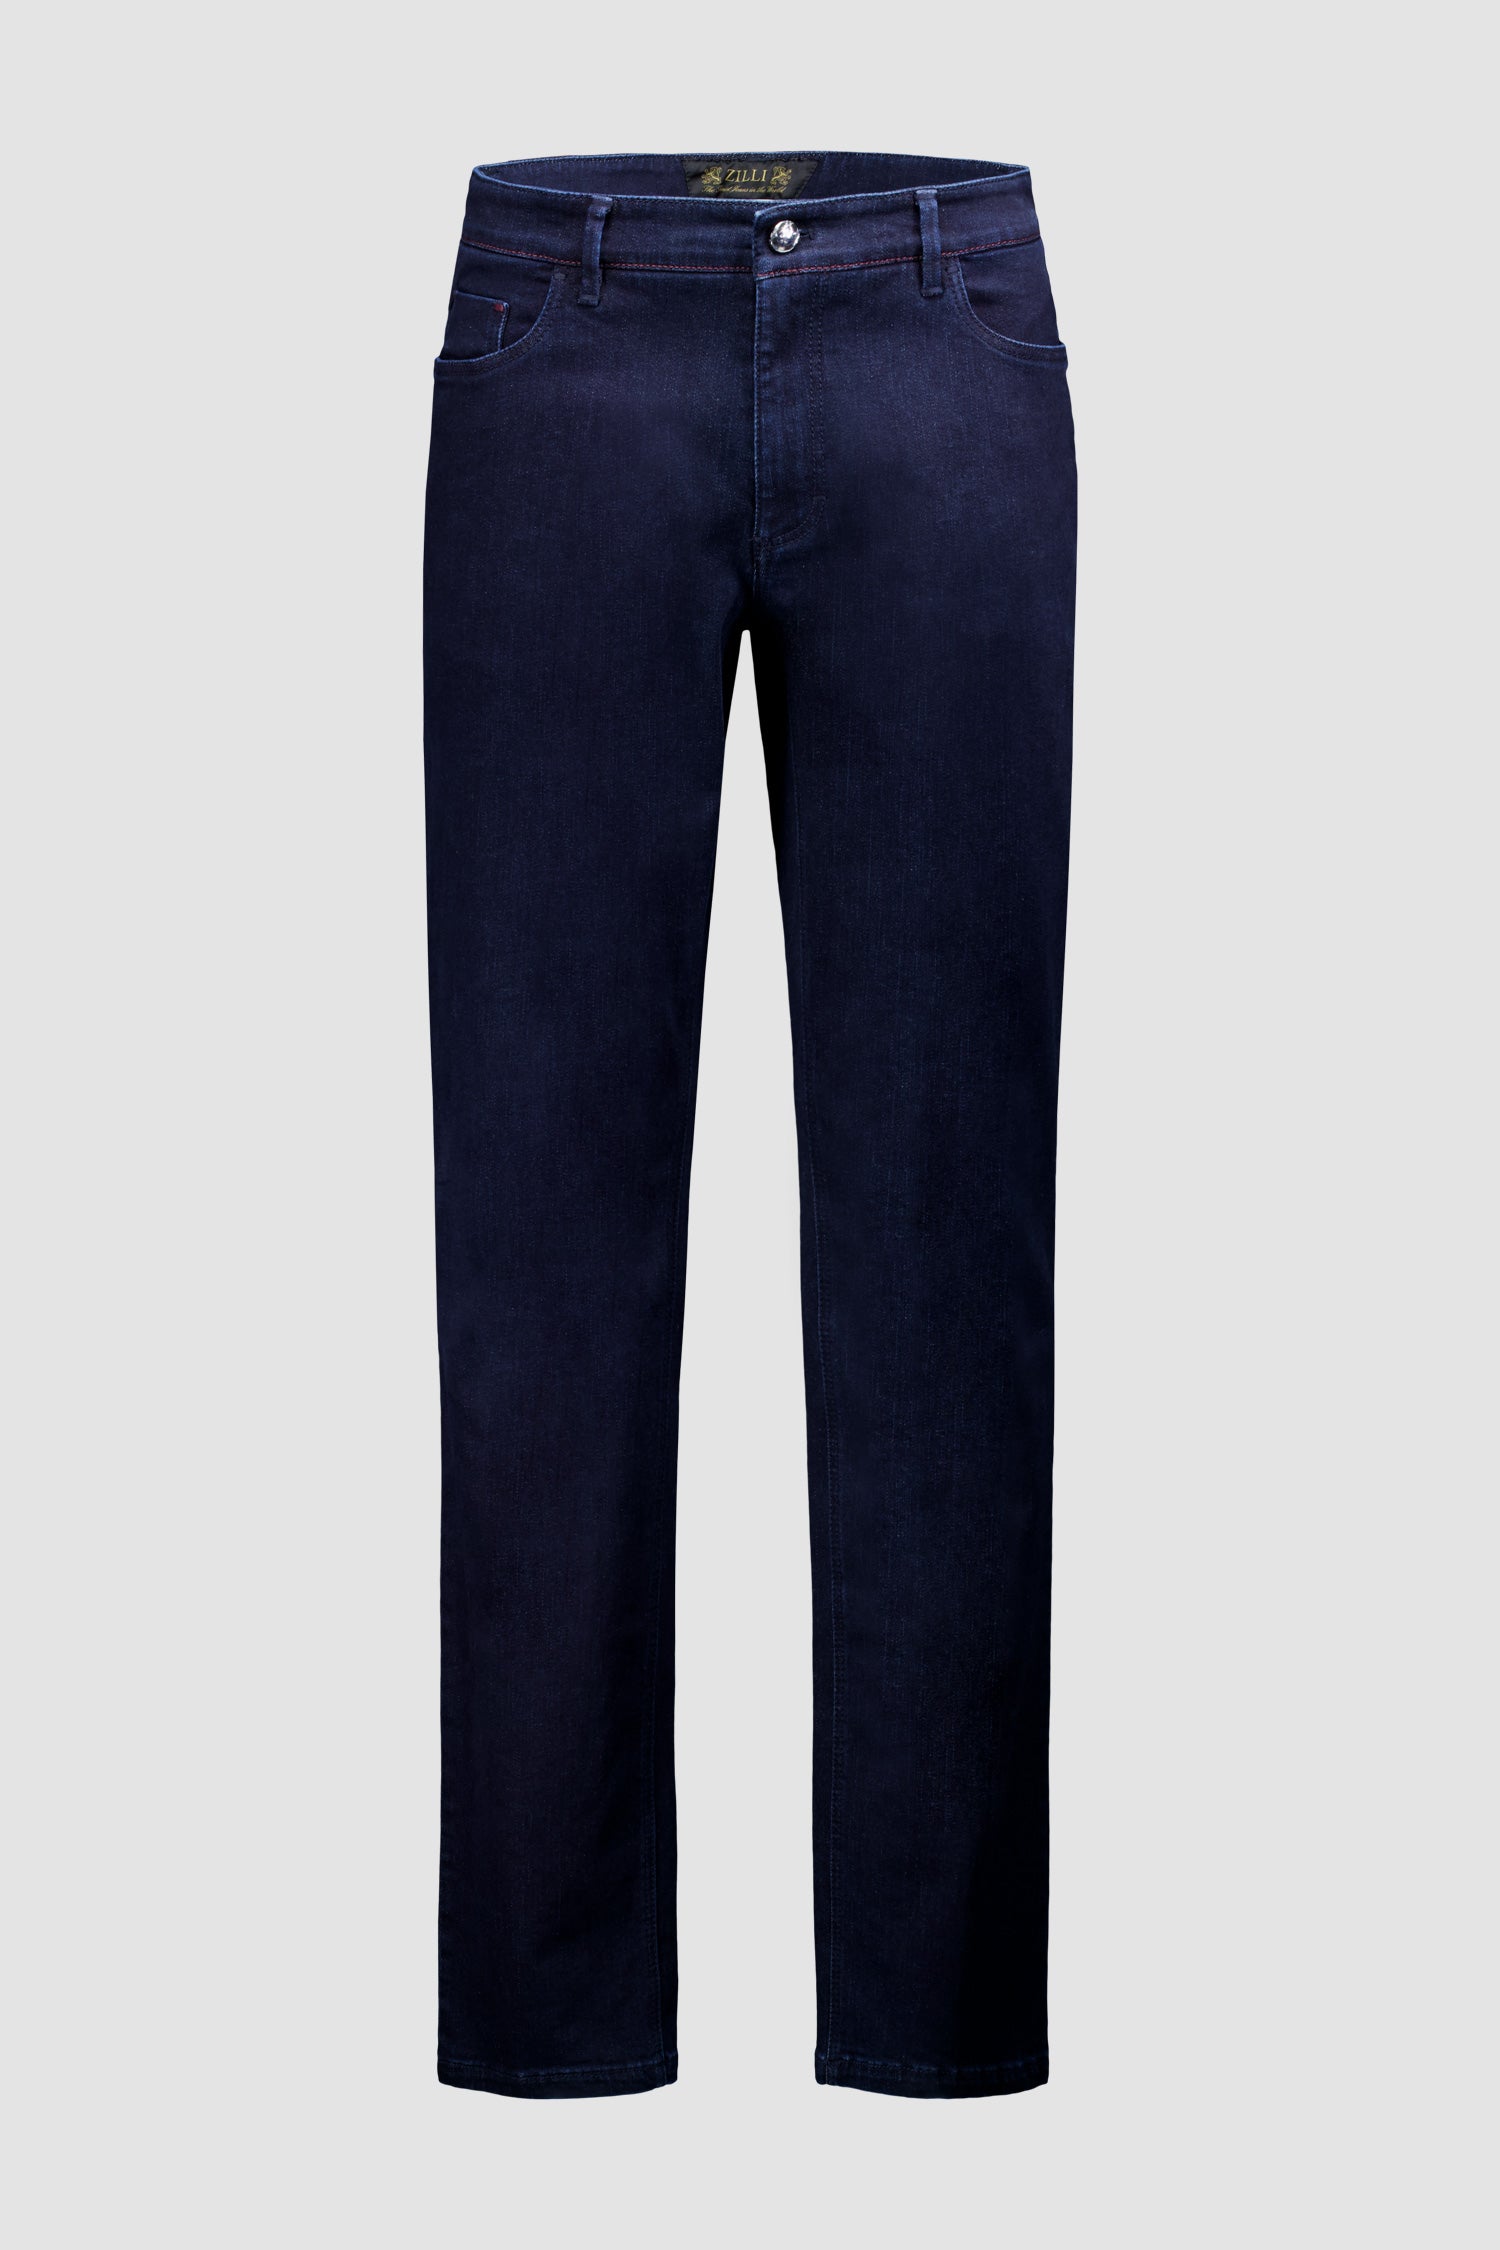 Zilli Micro Griffon Embroidered Regular Jeans